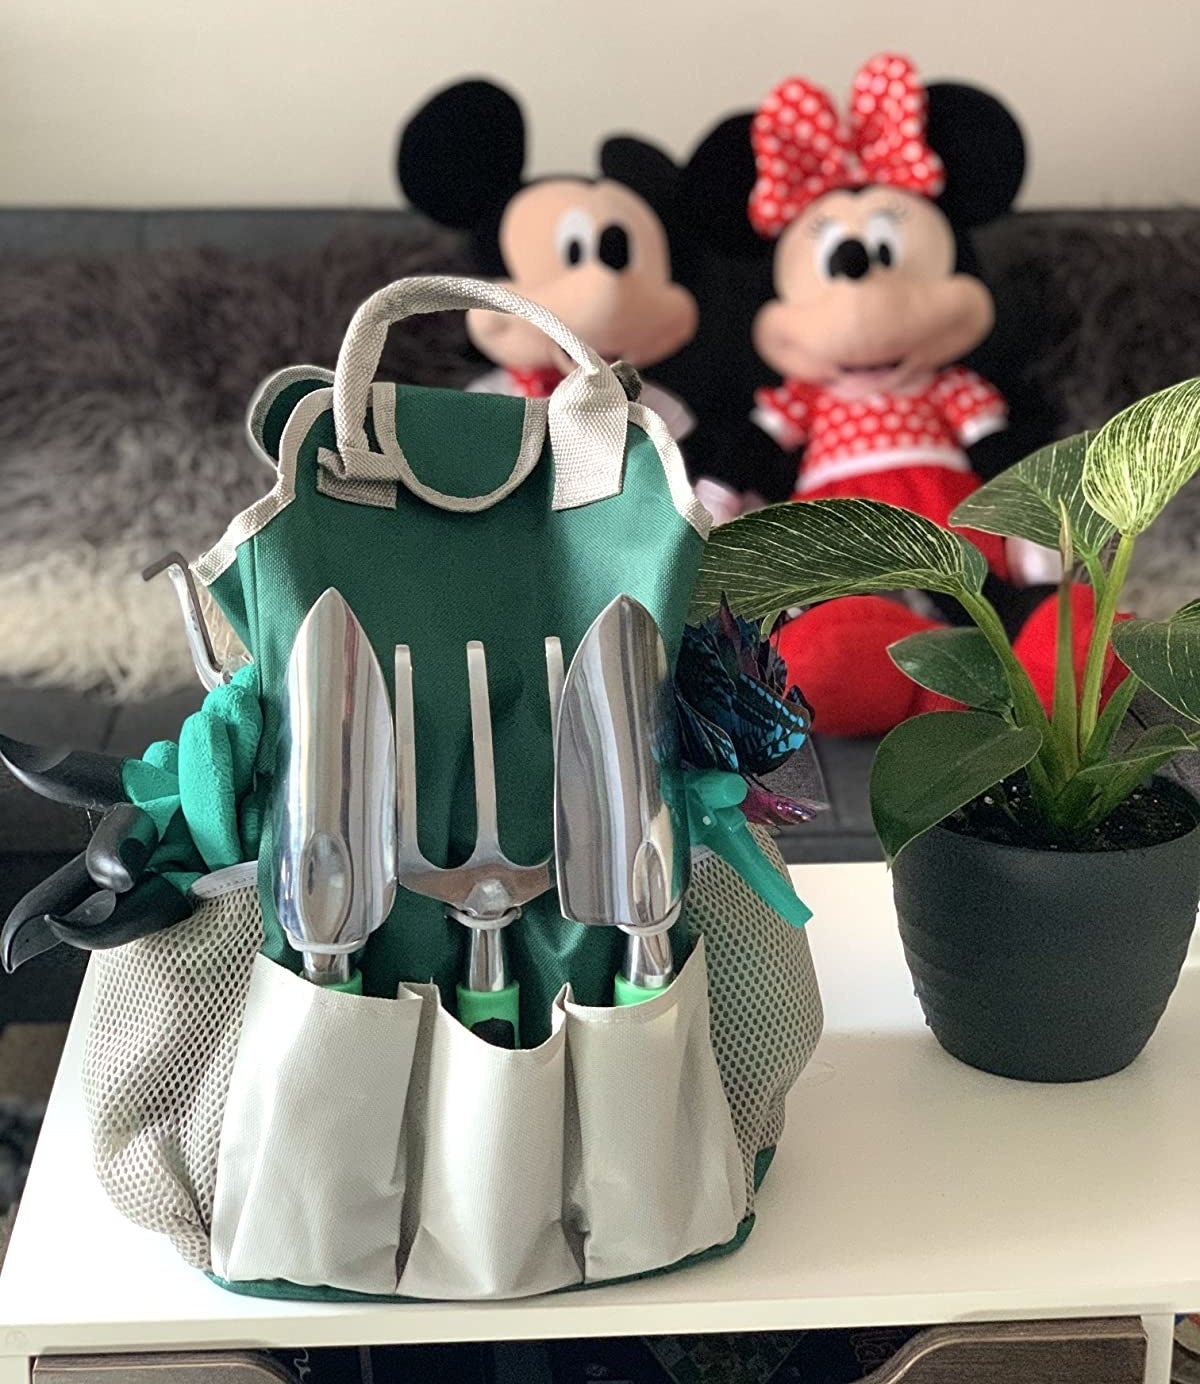 A reviewer photo of the gardening kit in the green bag that comes with it